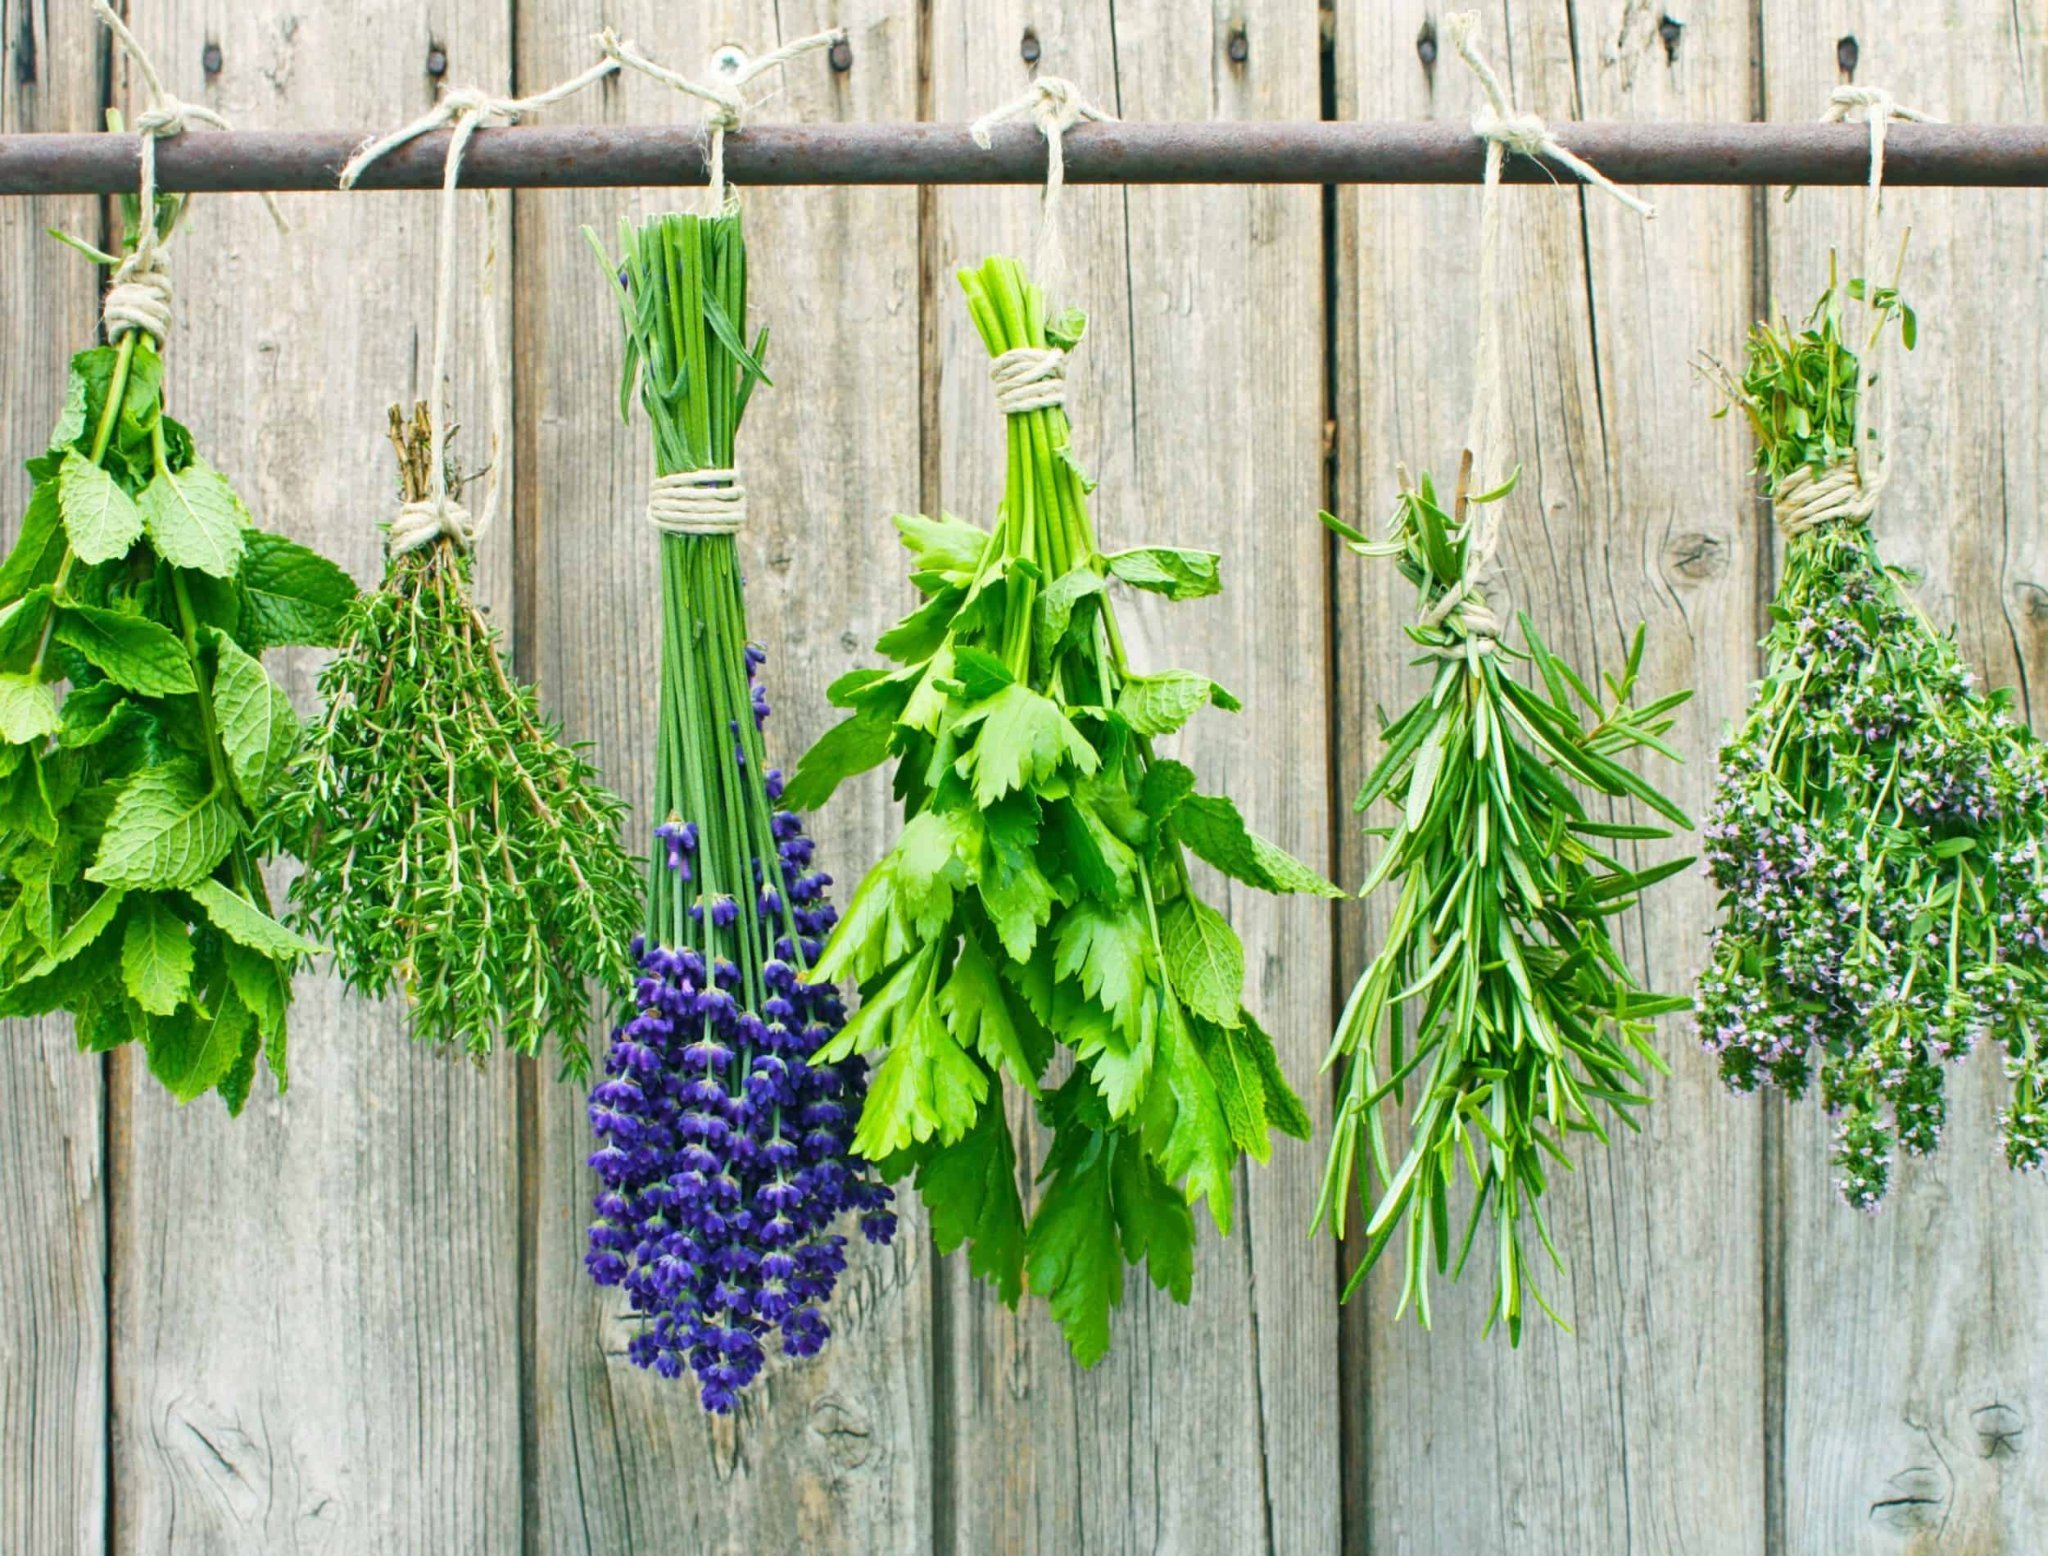 HOW TO STORE FRESH HERBS